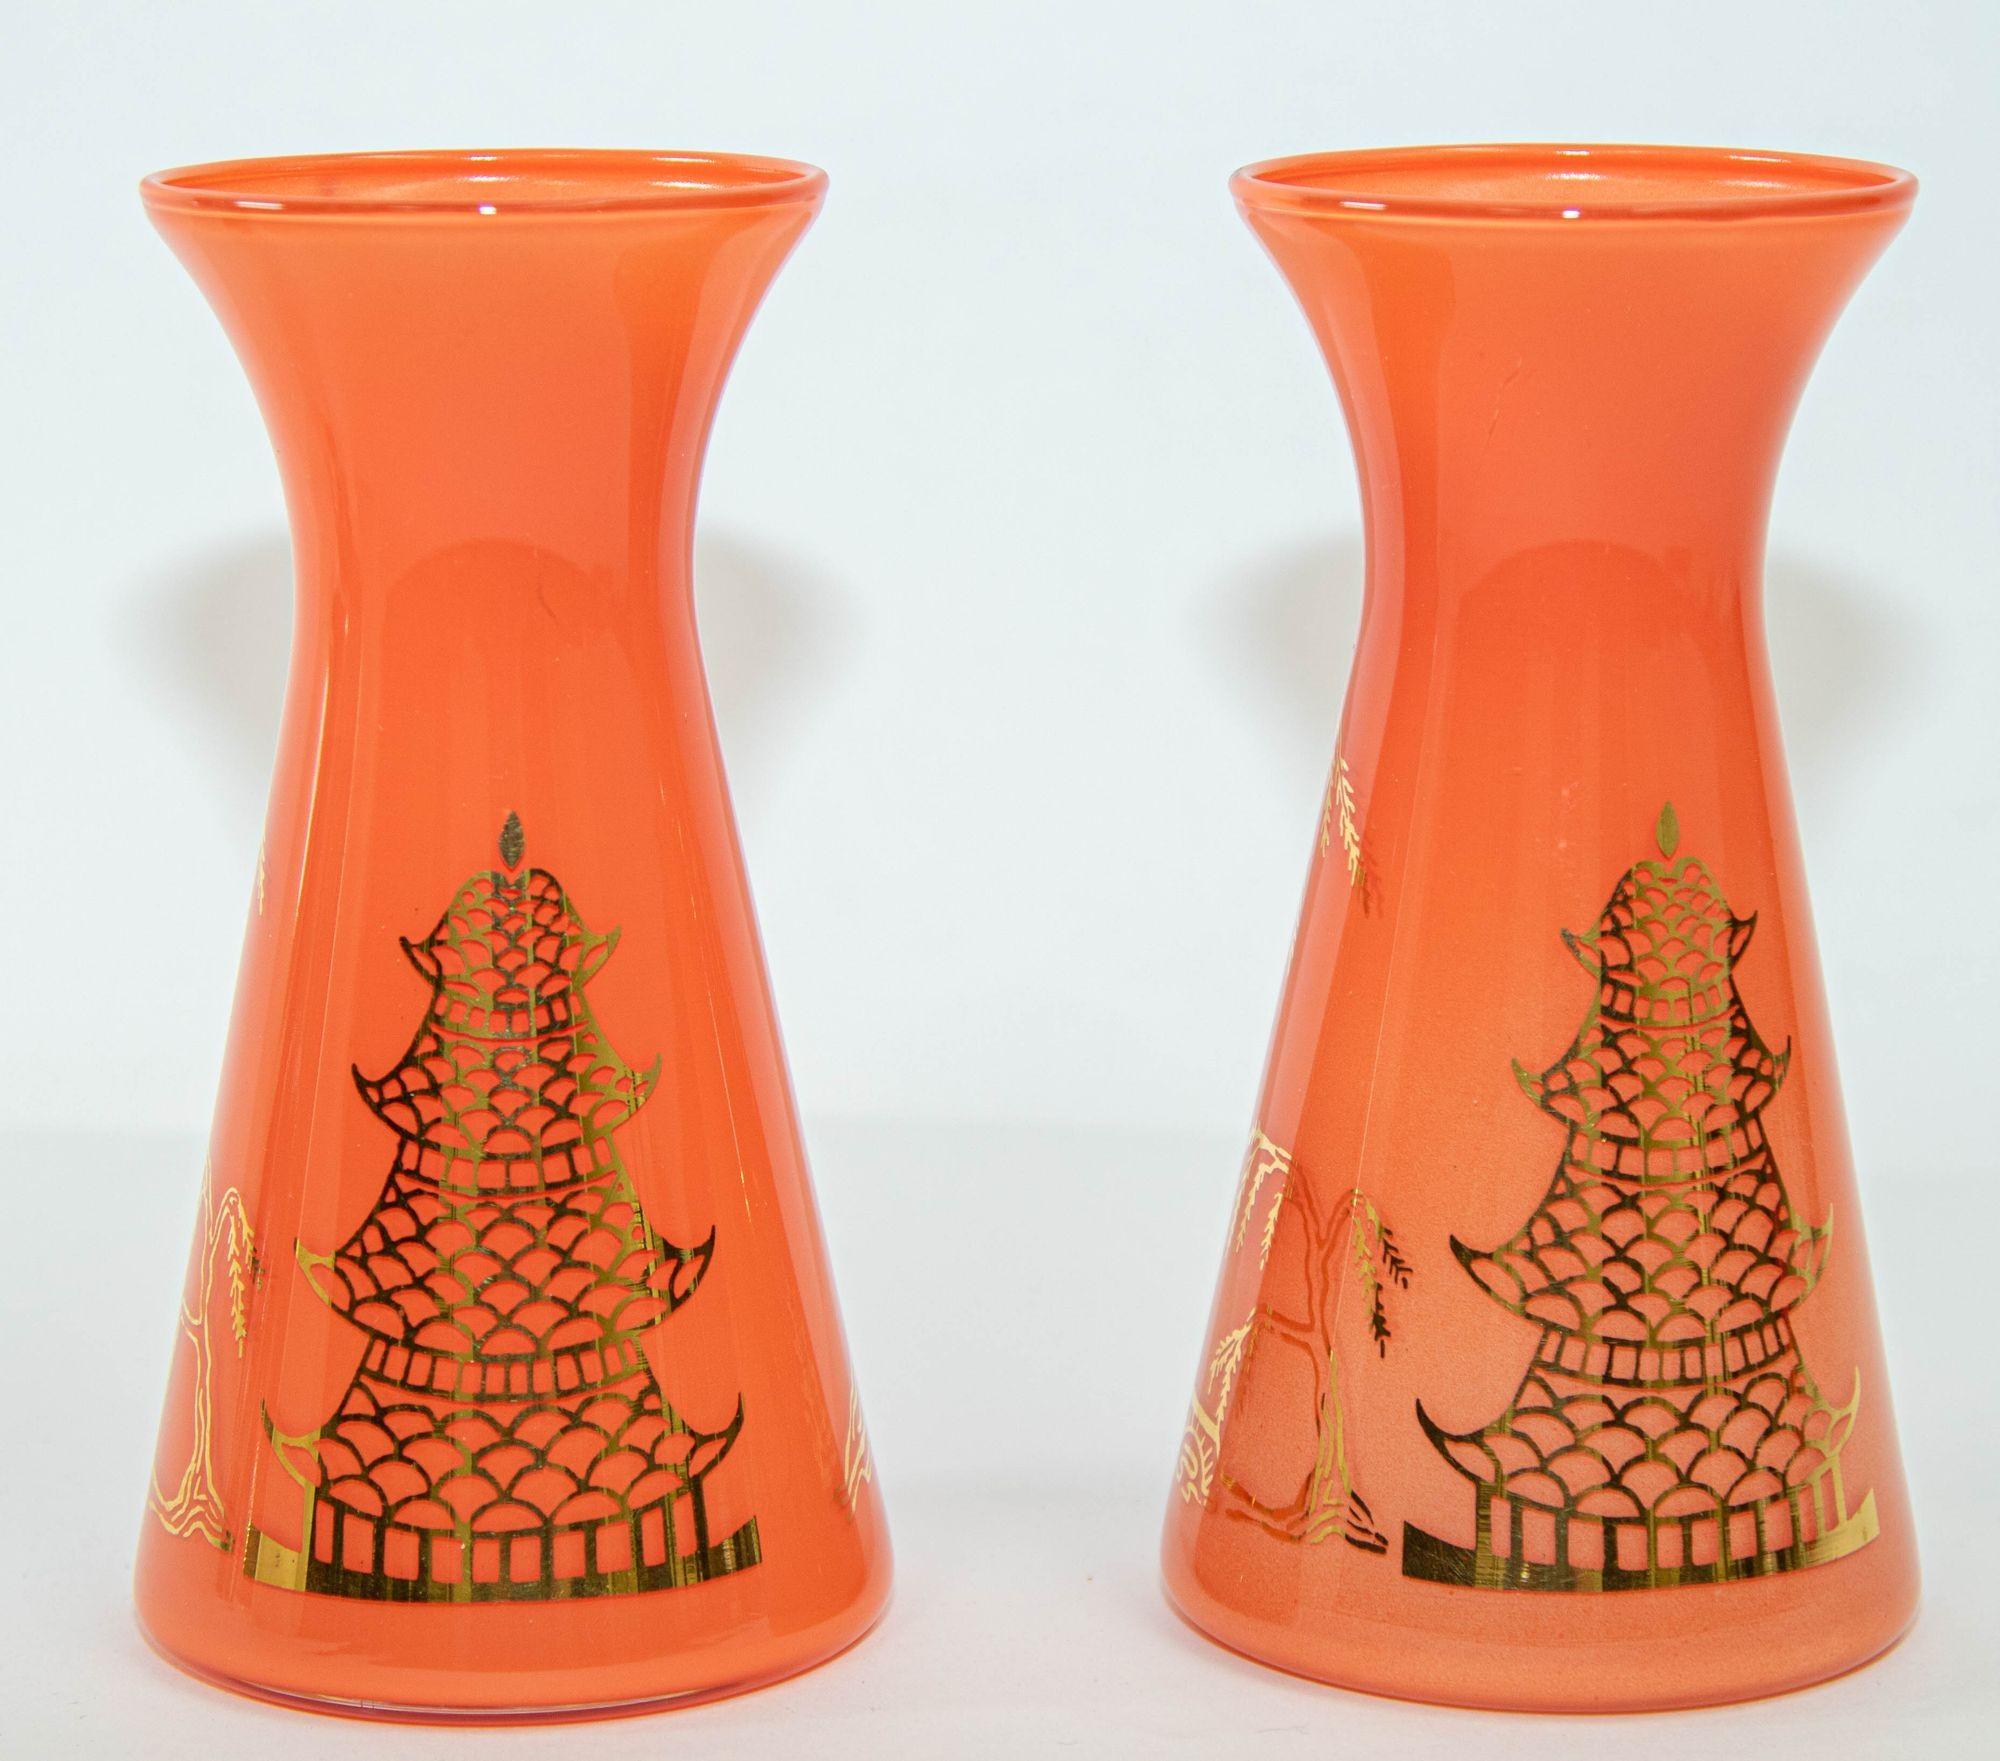 Vintage midcentury Oriental Orange Vases Set of 2 with Gold Asian Design.
Gay Fad style hand painted pair of bud glass vases in bright orange, coral color with gold designs Asian trees and pagodas.
Dimensions: 6 in H x 3.25 in D. at base, Top